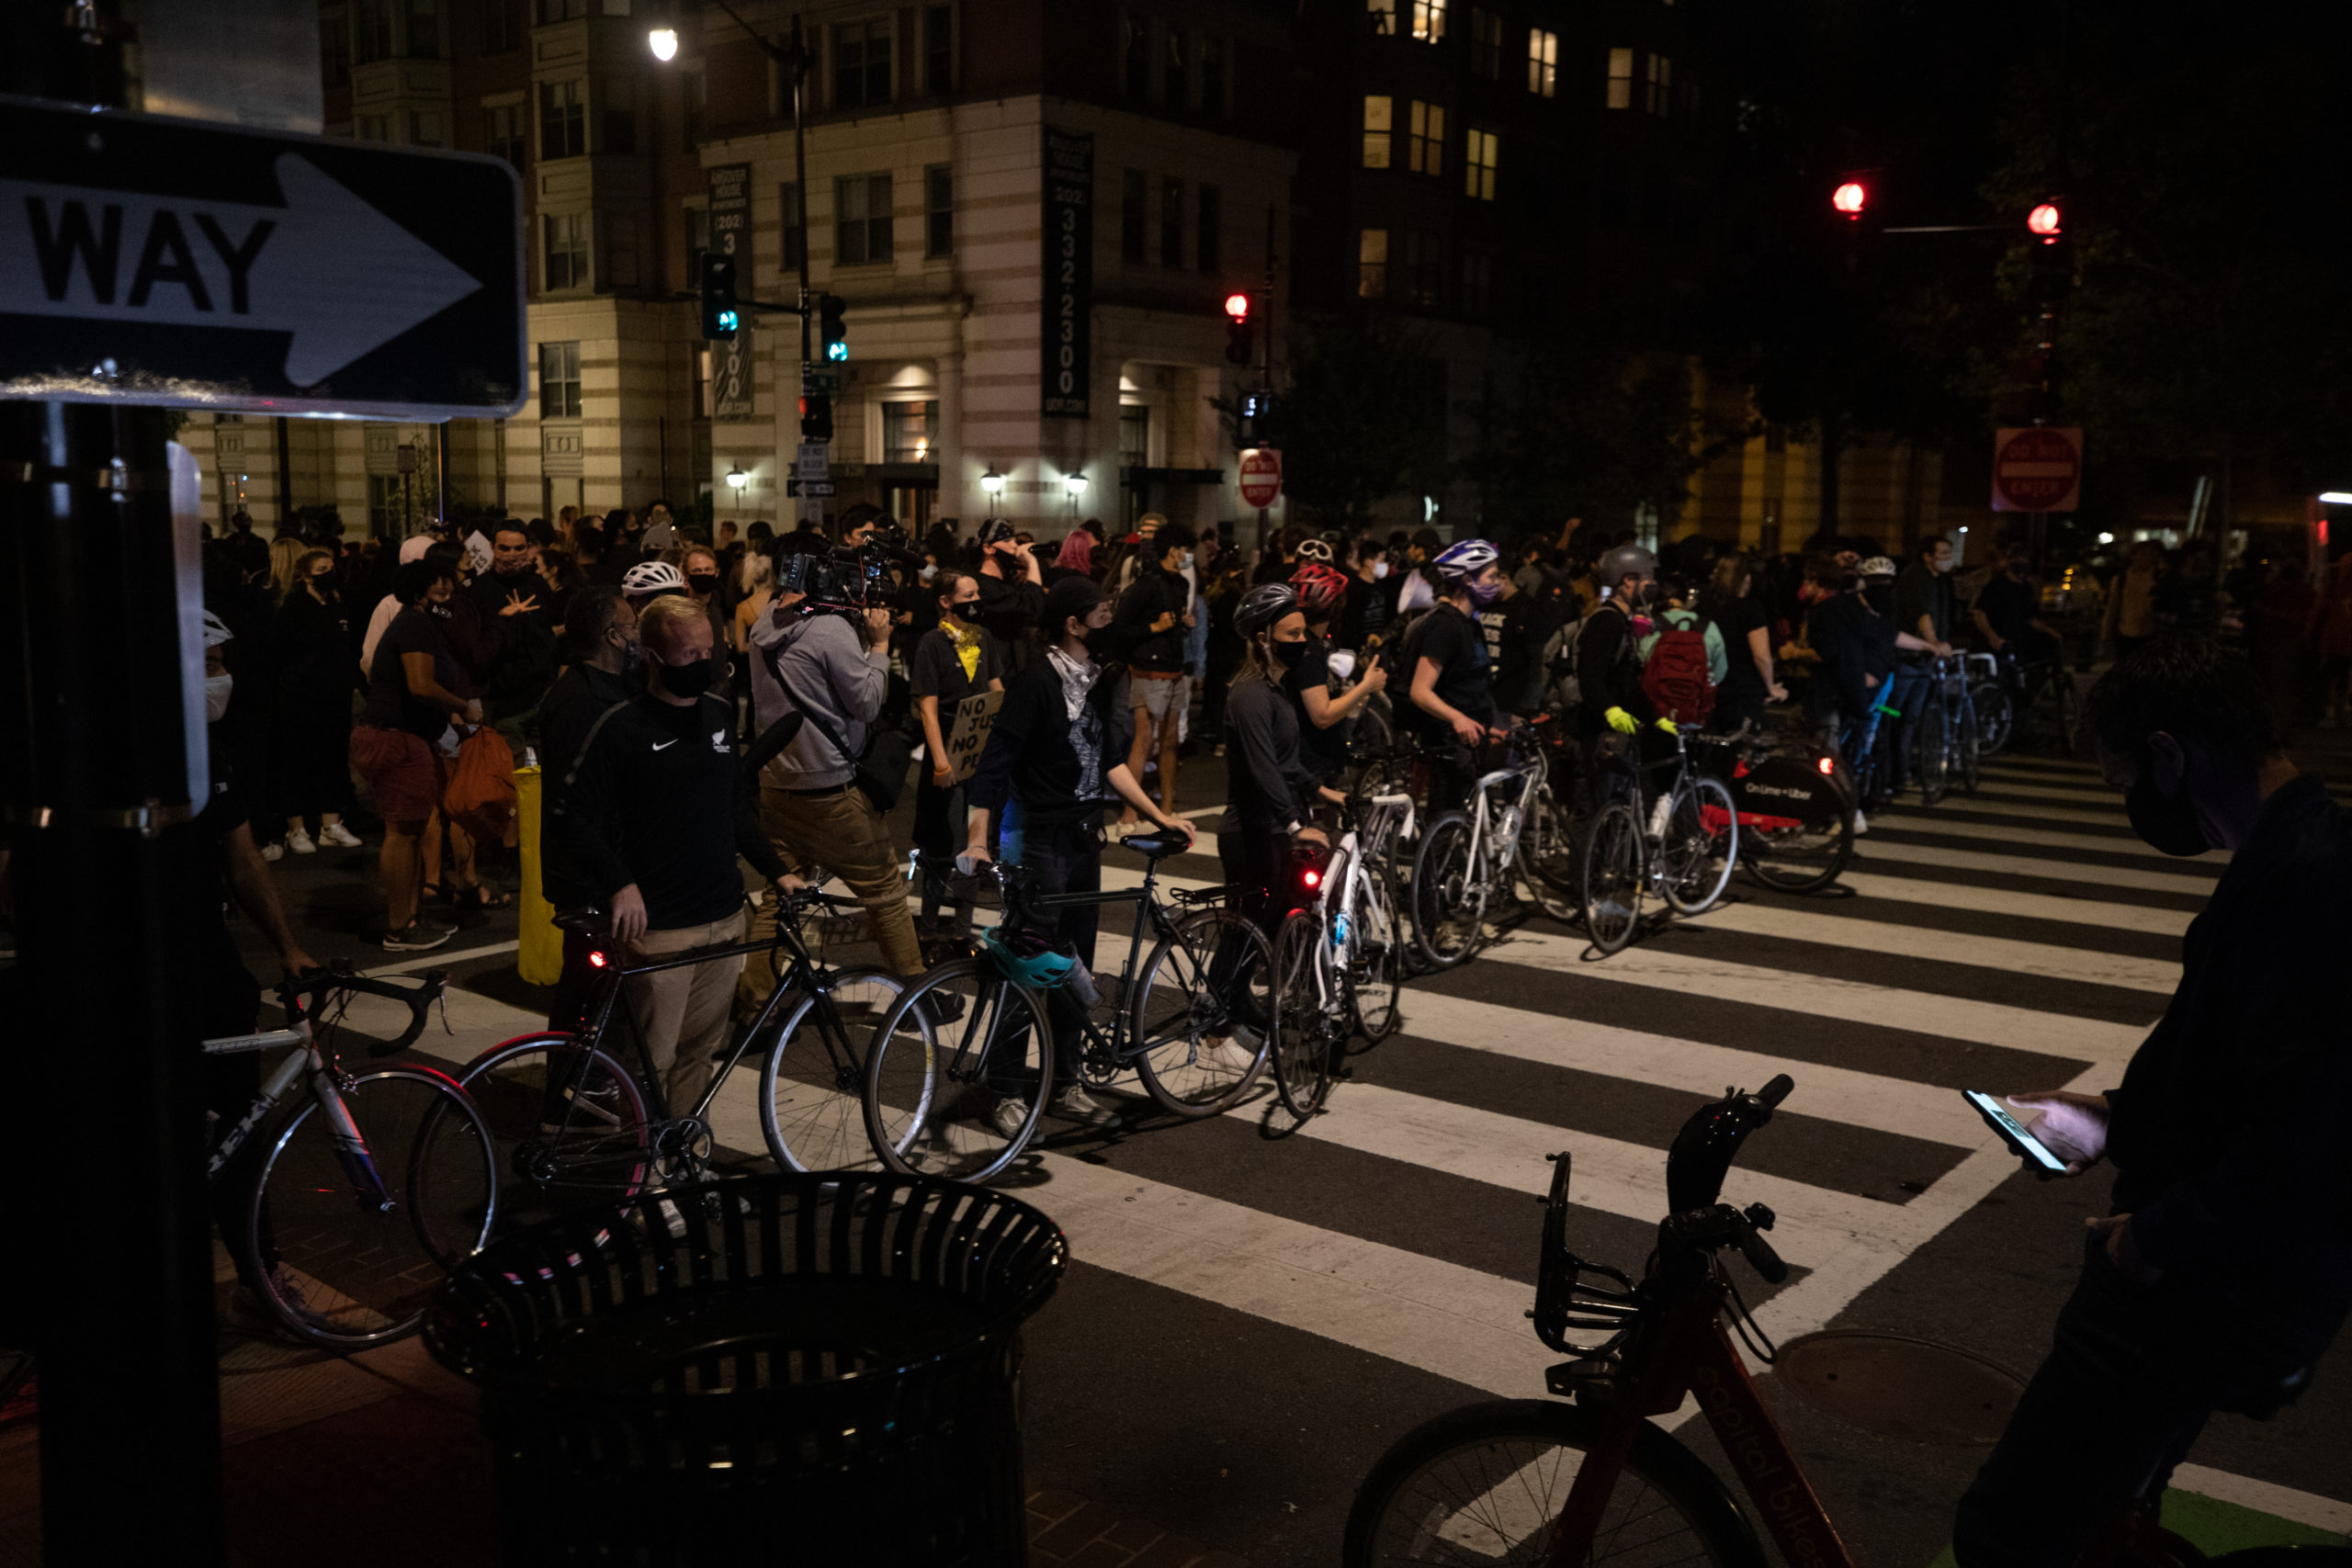 Protesters formed their own bike line to keep Metropolitan Police Officers from getting too close to people on foot in Washington, D.C. on Sept. 23. (Photo: Kaylee Greenlee / DCNF)